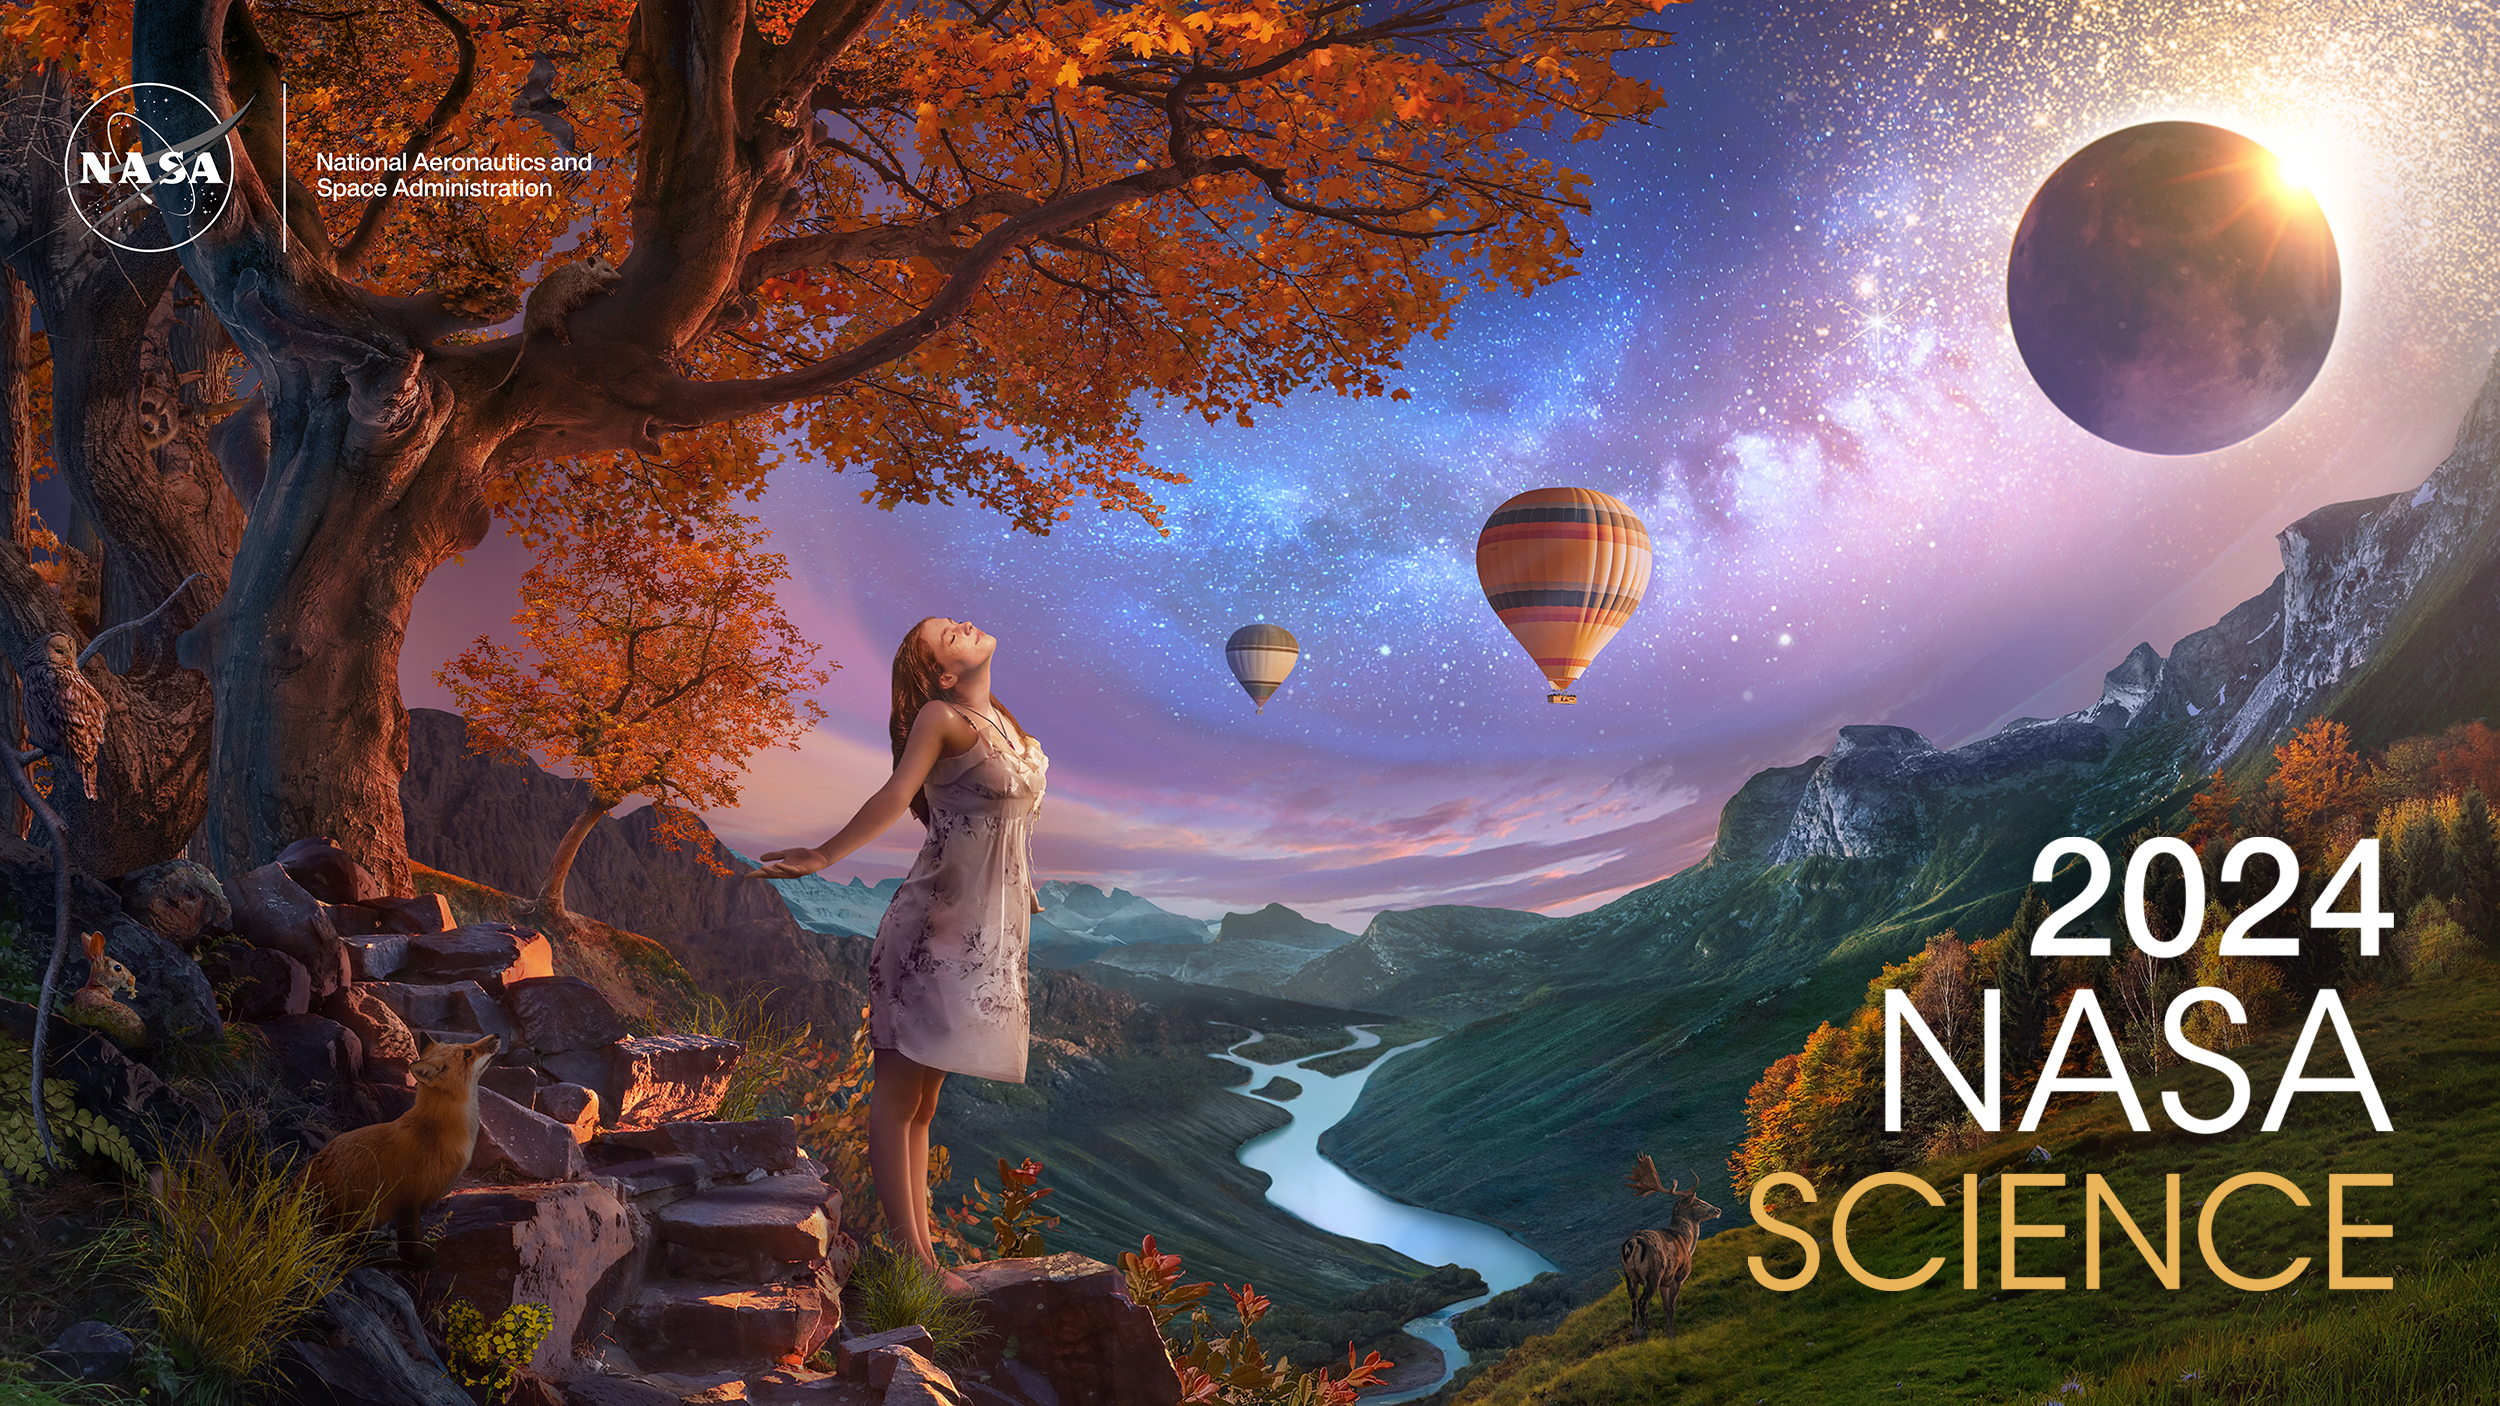 An artist’s concept of a landscape, composed of dusky purples, oranges, golds, and greens. In the left foreground, a young woman wearing a white dress basks in the rays of a solar eclipse. She stands under a bright orange fall tree rooted to the side of a rocky mountain trail. The scene overlooks a valley with a river running through the middle towards distant hazy blue mountains. Nocturnal animals – including a fox, owl, possum, and bat – emerge to investigate the sudden onset of night. A deer stands on a grassy knoll at right in front of a line of fall colored trees. The Milky Way trails across the sky, leading up from the young woman to the eclipse and glittering stars at top right. Two hot air balloons float in the distance. This concept was created in celebration of the Heliophysics Big Year, which is bookended by the Annular Eclipse in October of 2023 and the Total Solar Eclipse in April of 2024. 